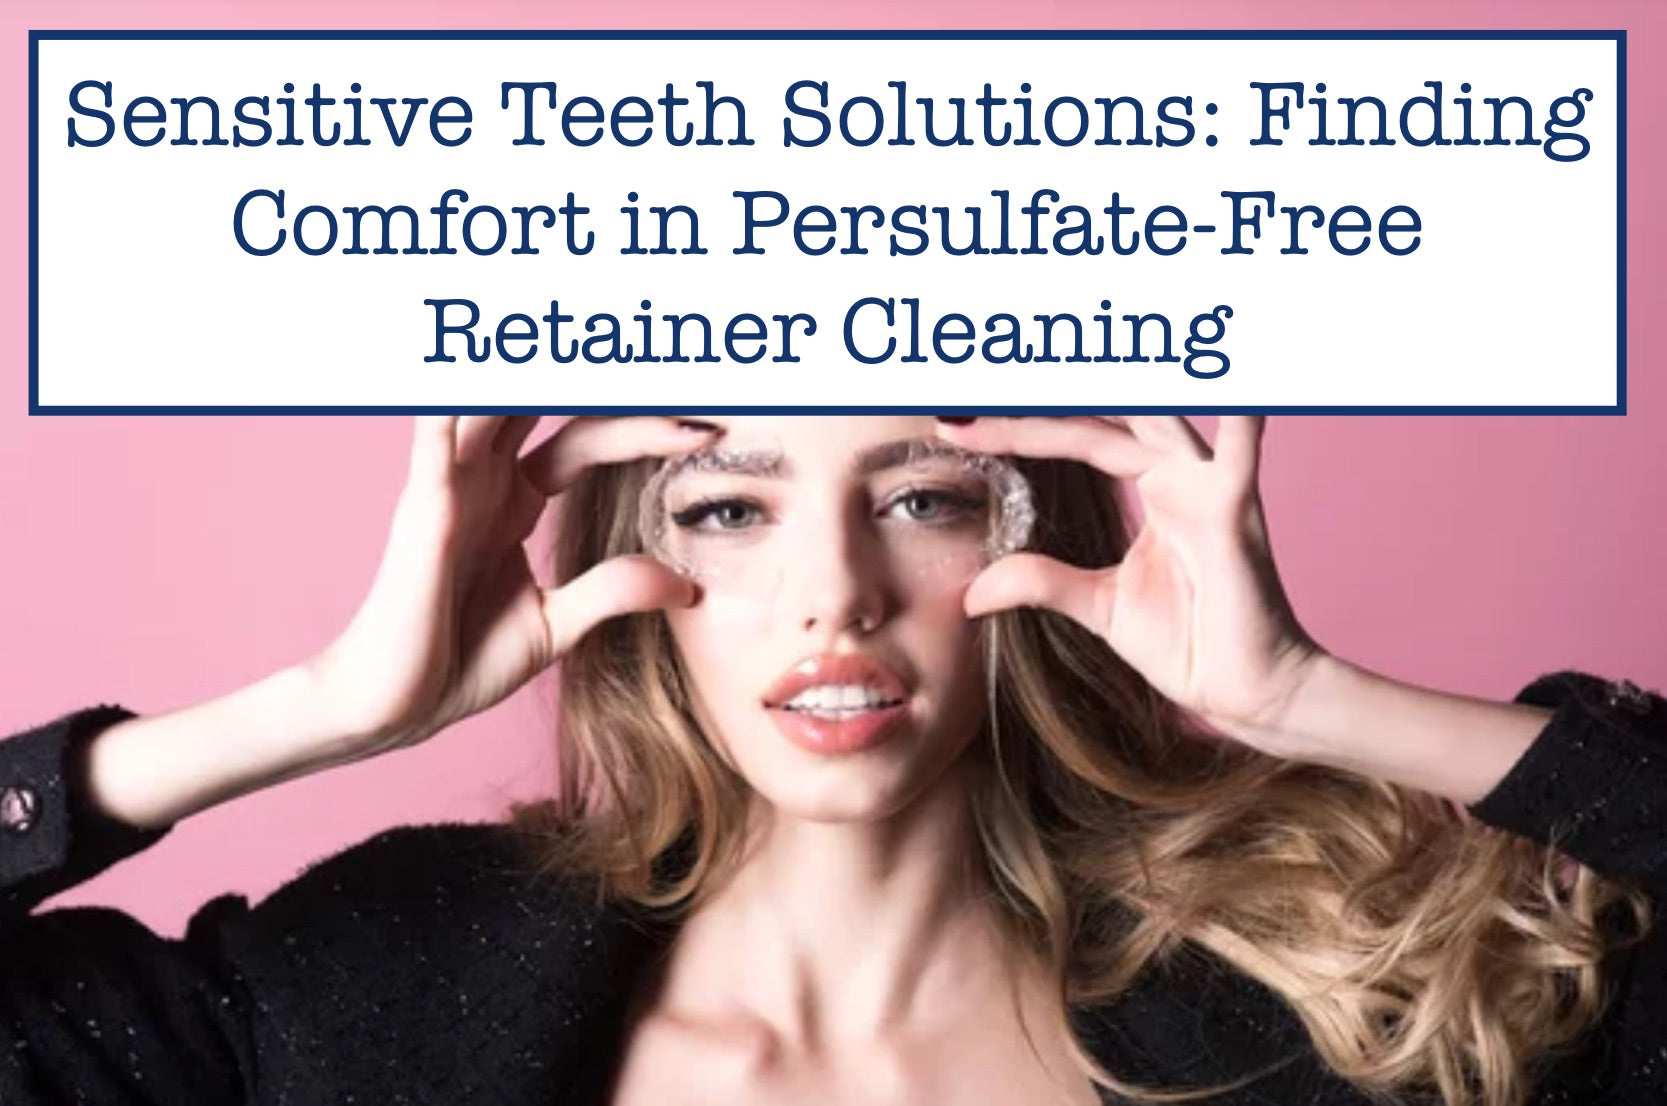 Sensitive Teeth Solutions: Finding Comfort in Persulfate-Free Retainer Cleaning